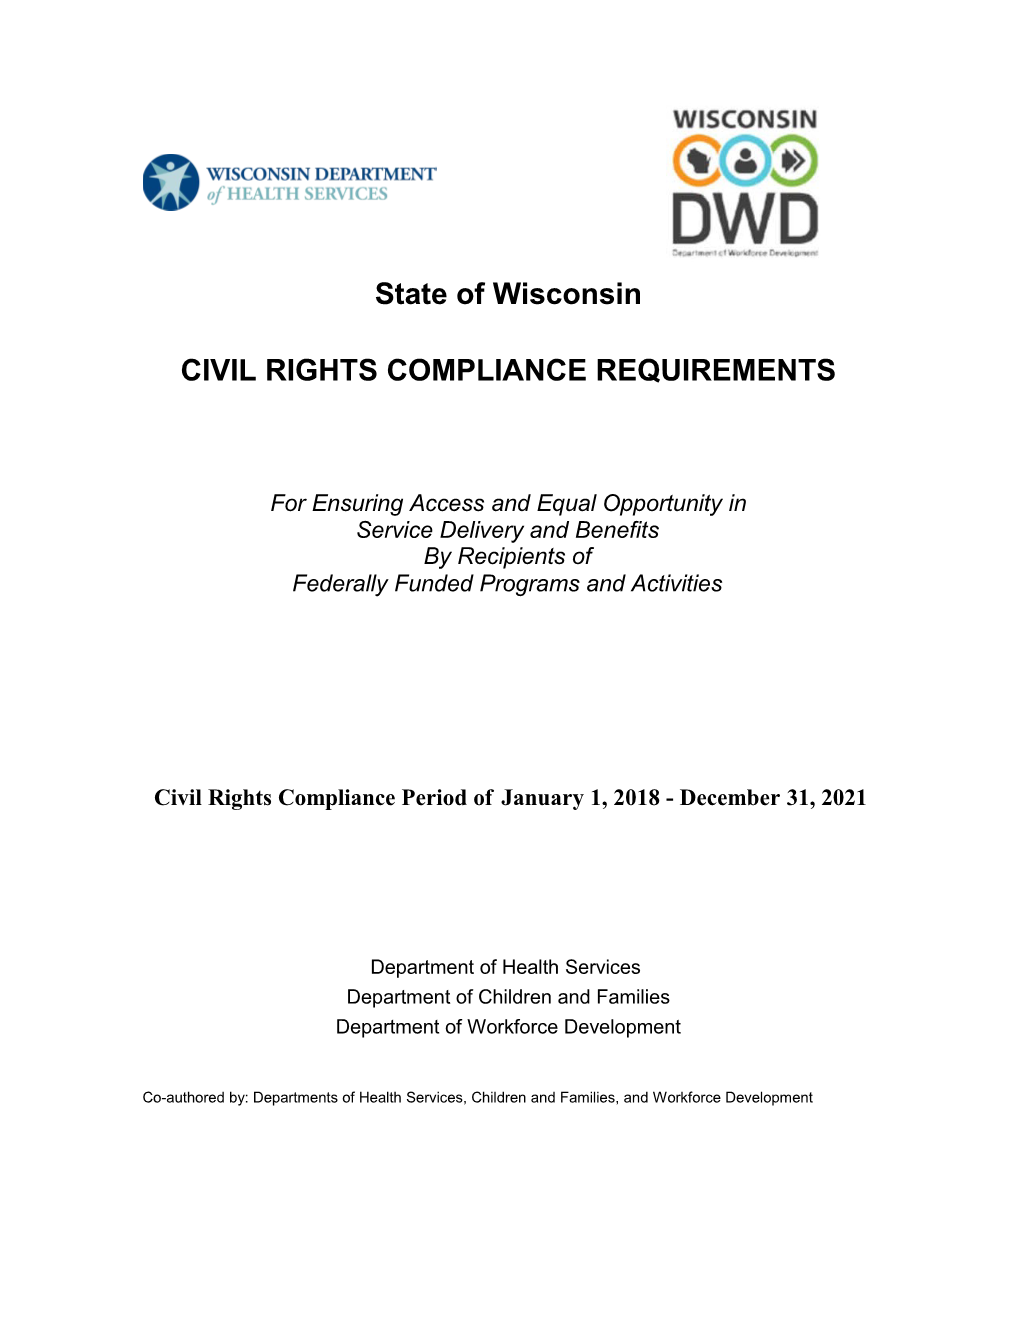 Civil Rights Compliance Requirements